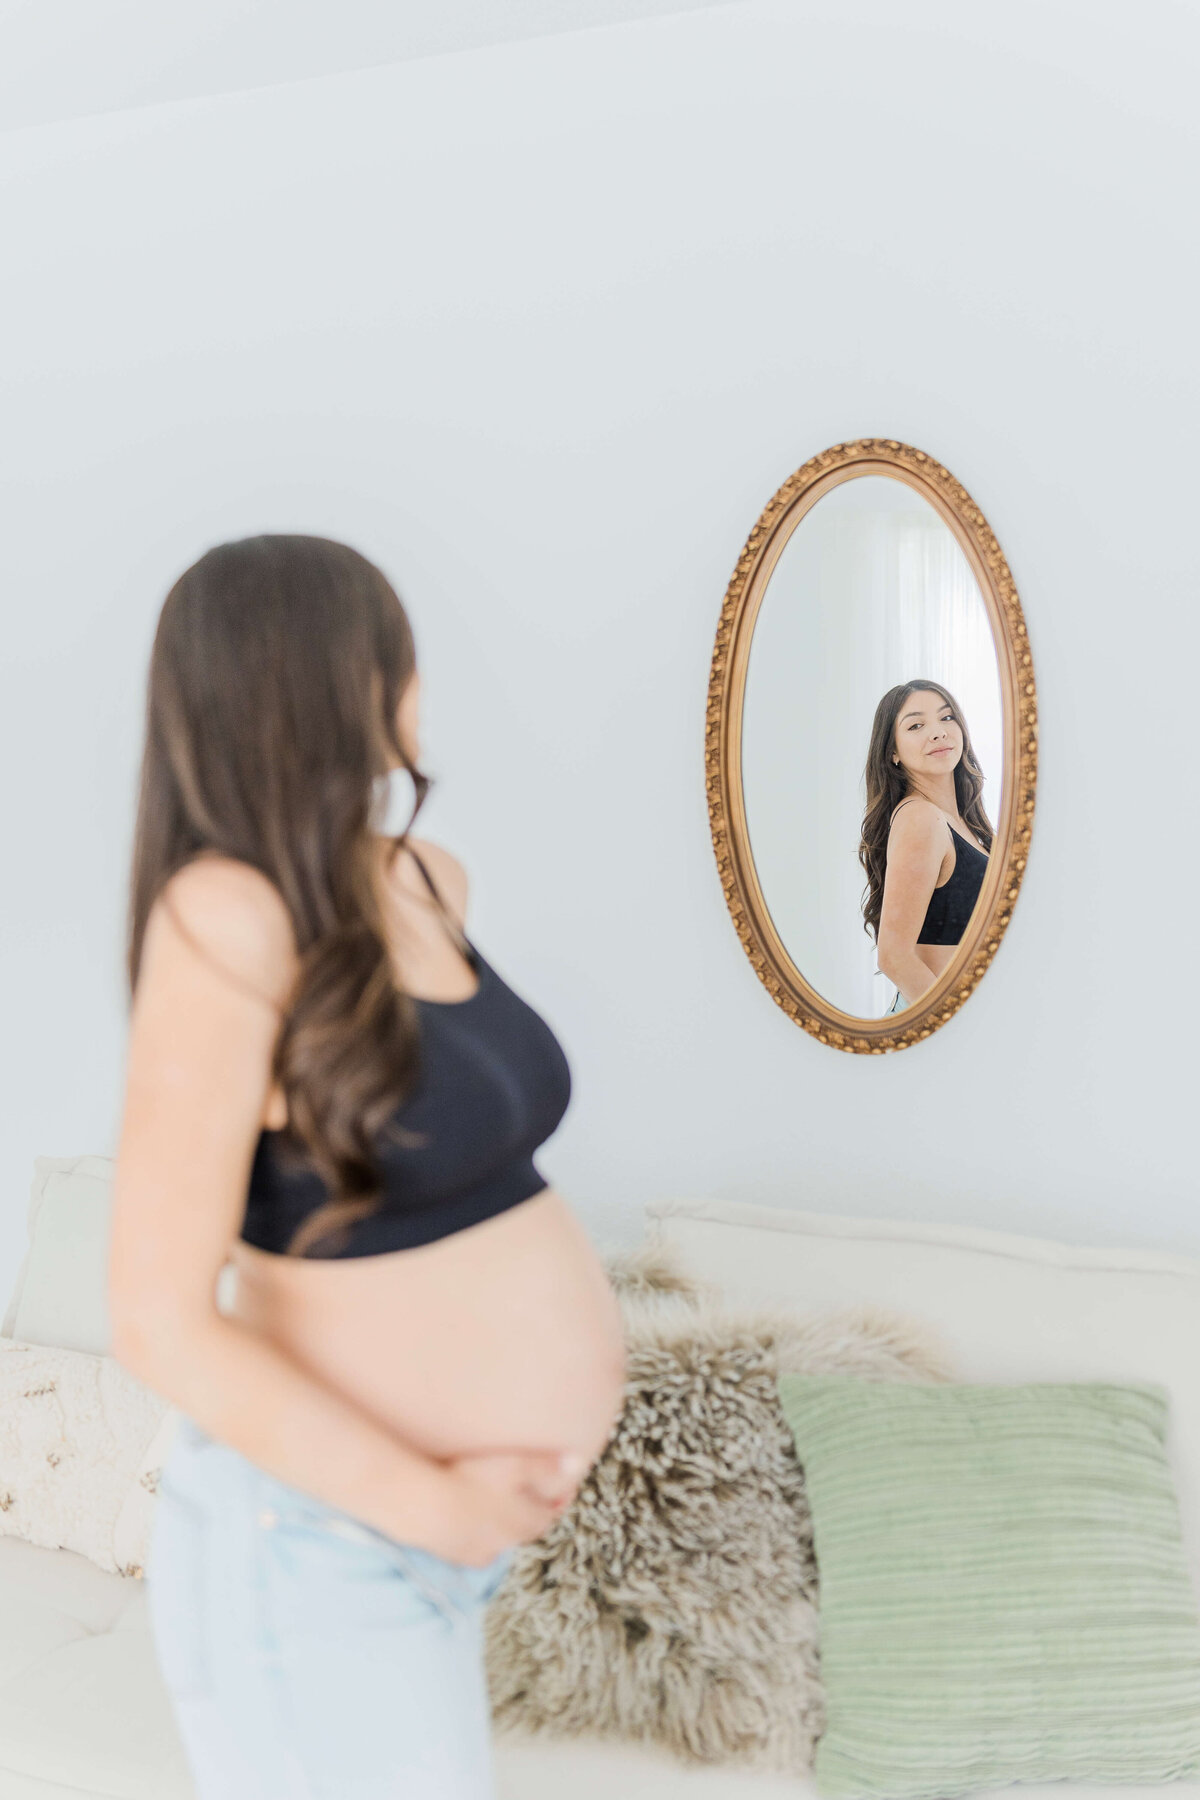 Pregnant mother standing while looking at pregnant self in the mirror reflection